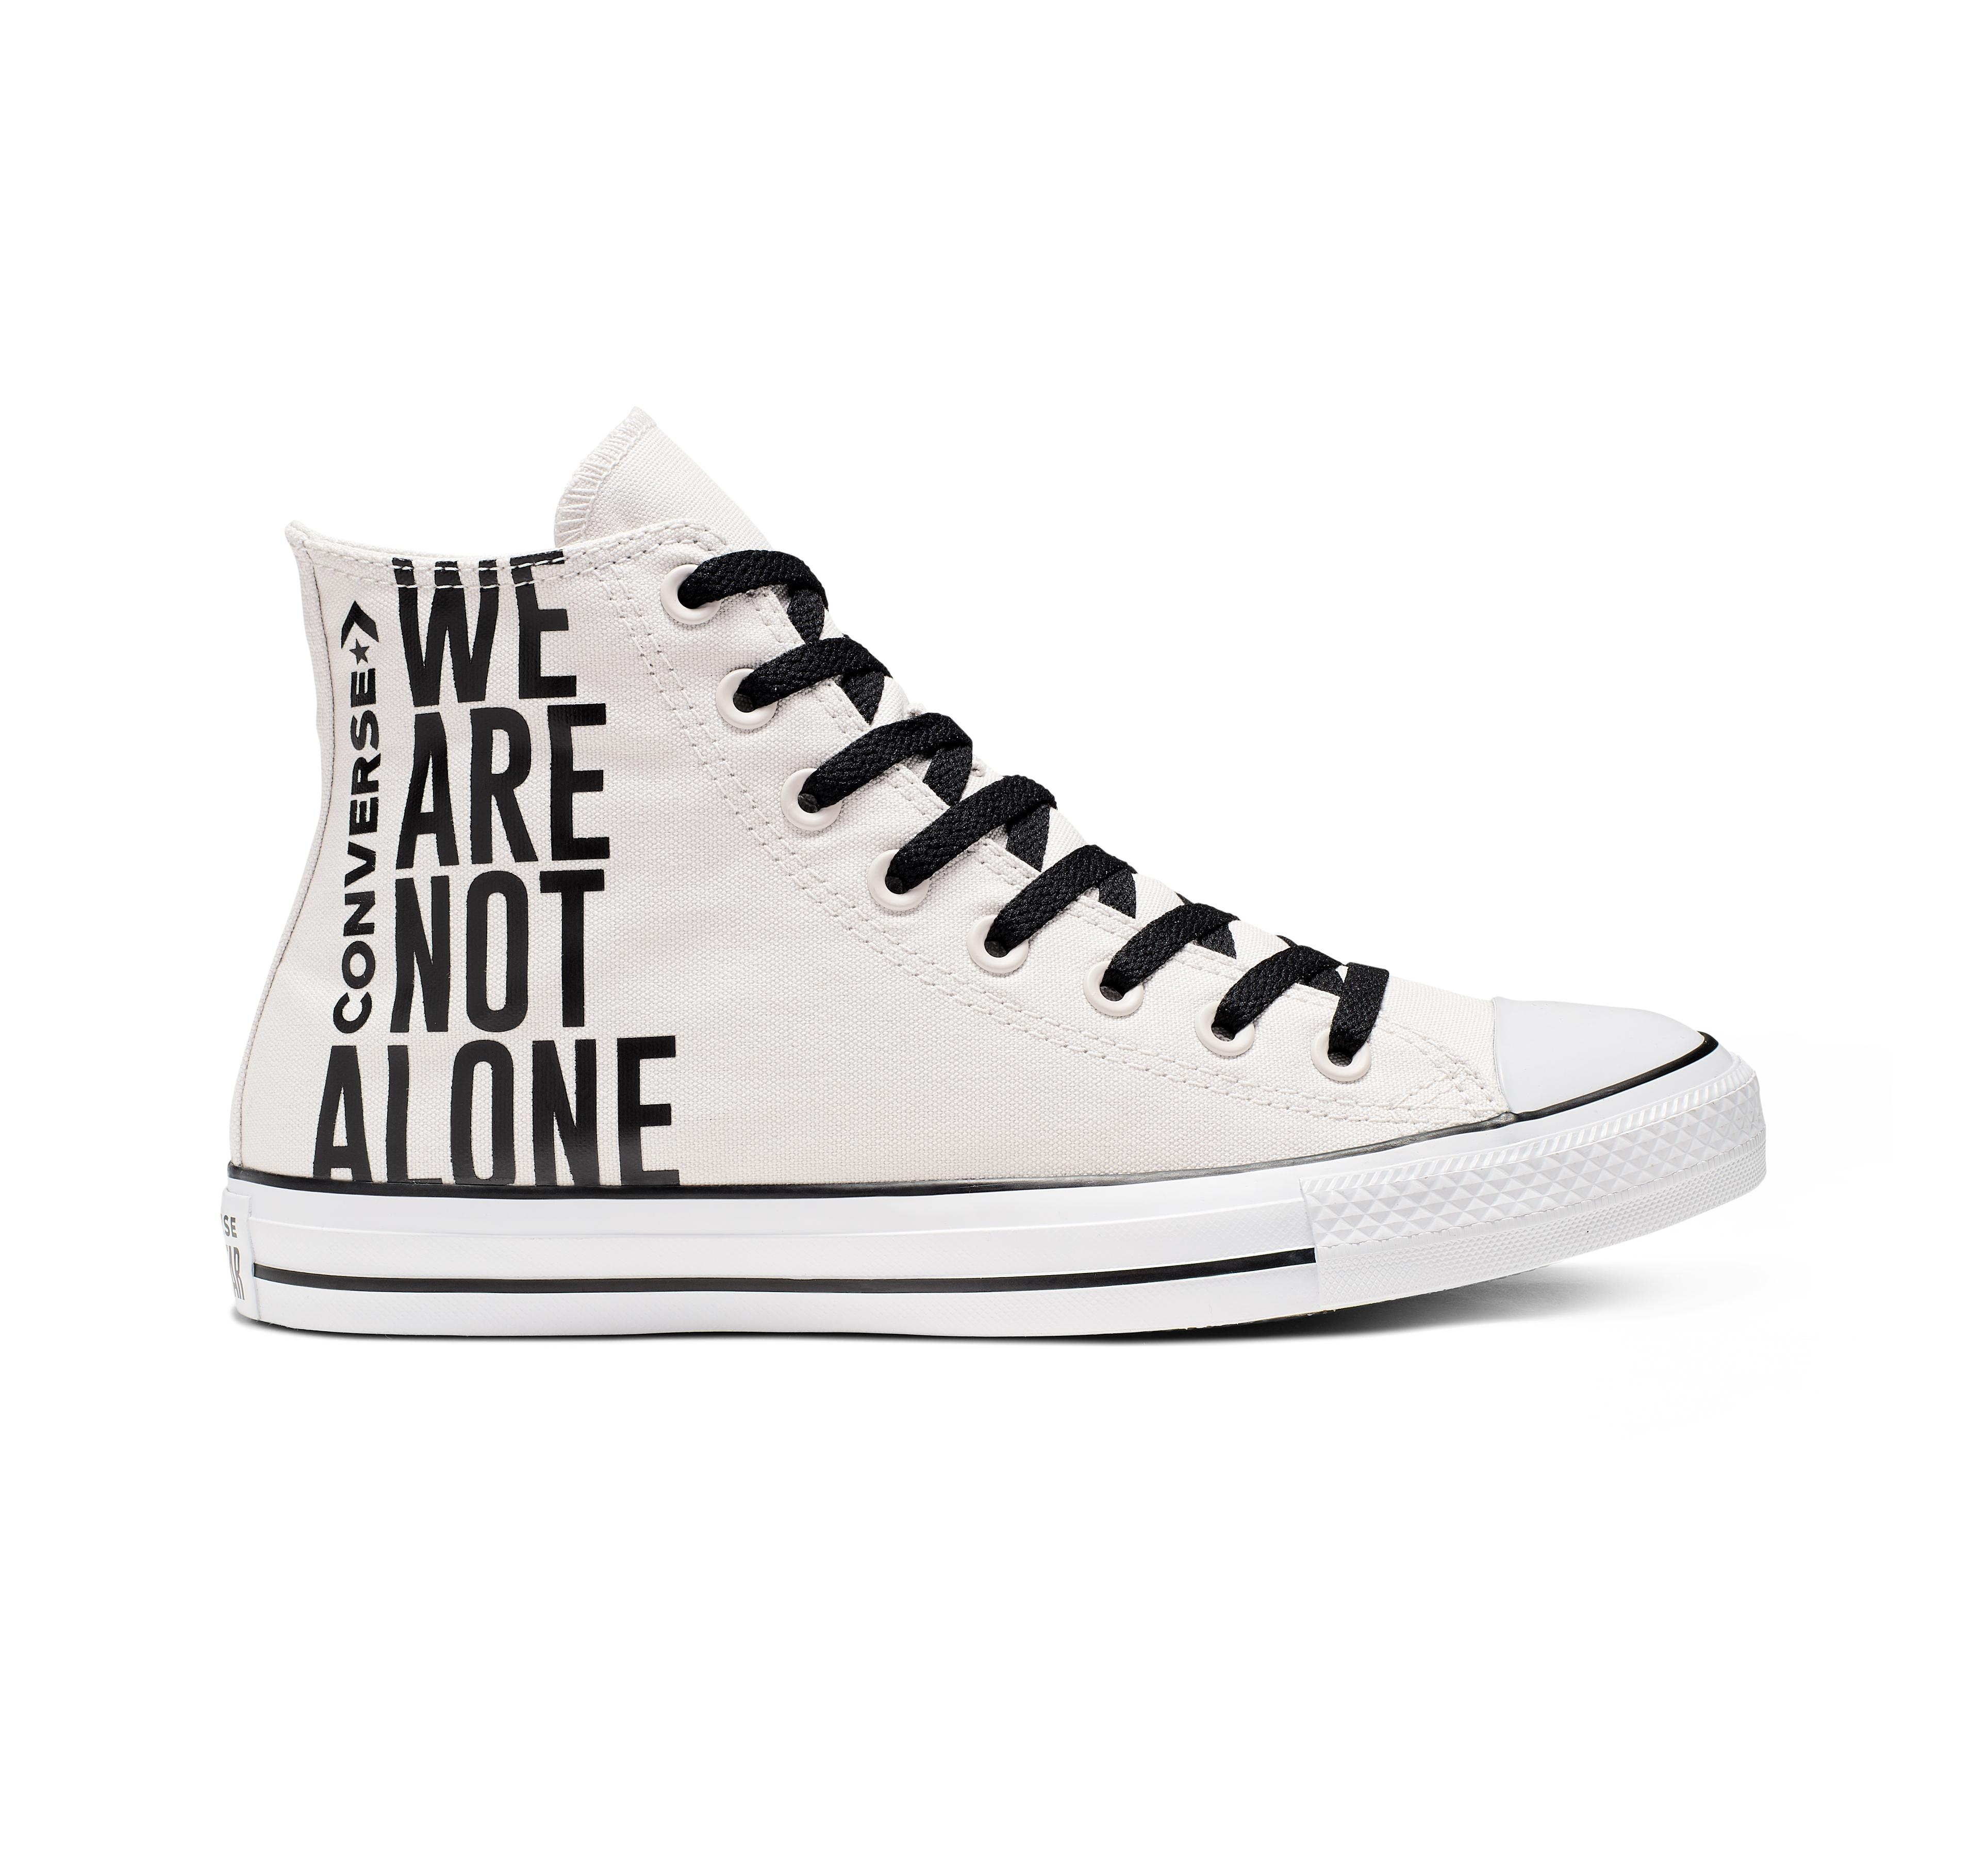 chuck taylor we are not alone